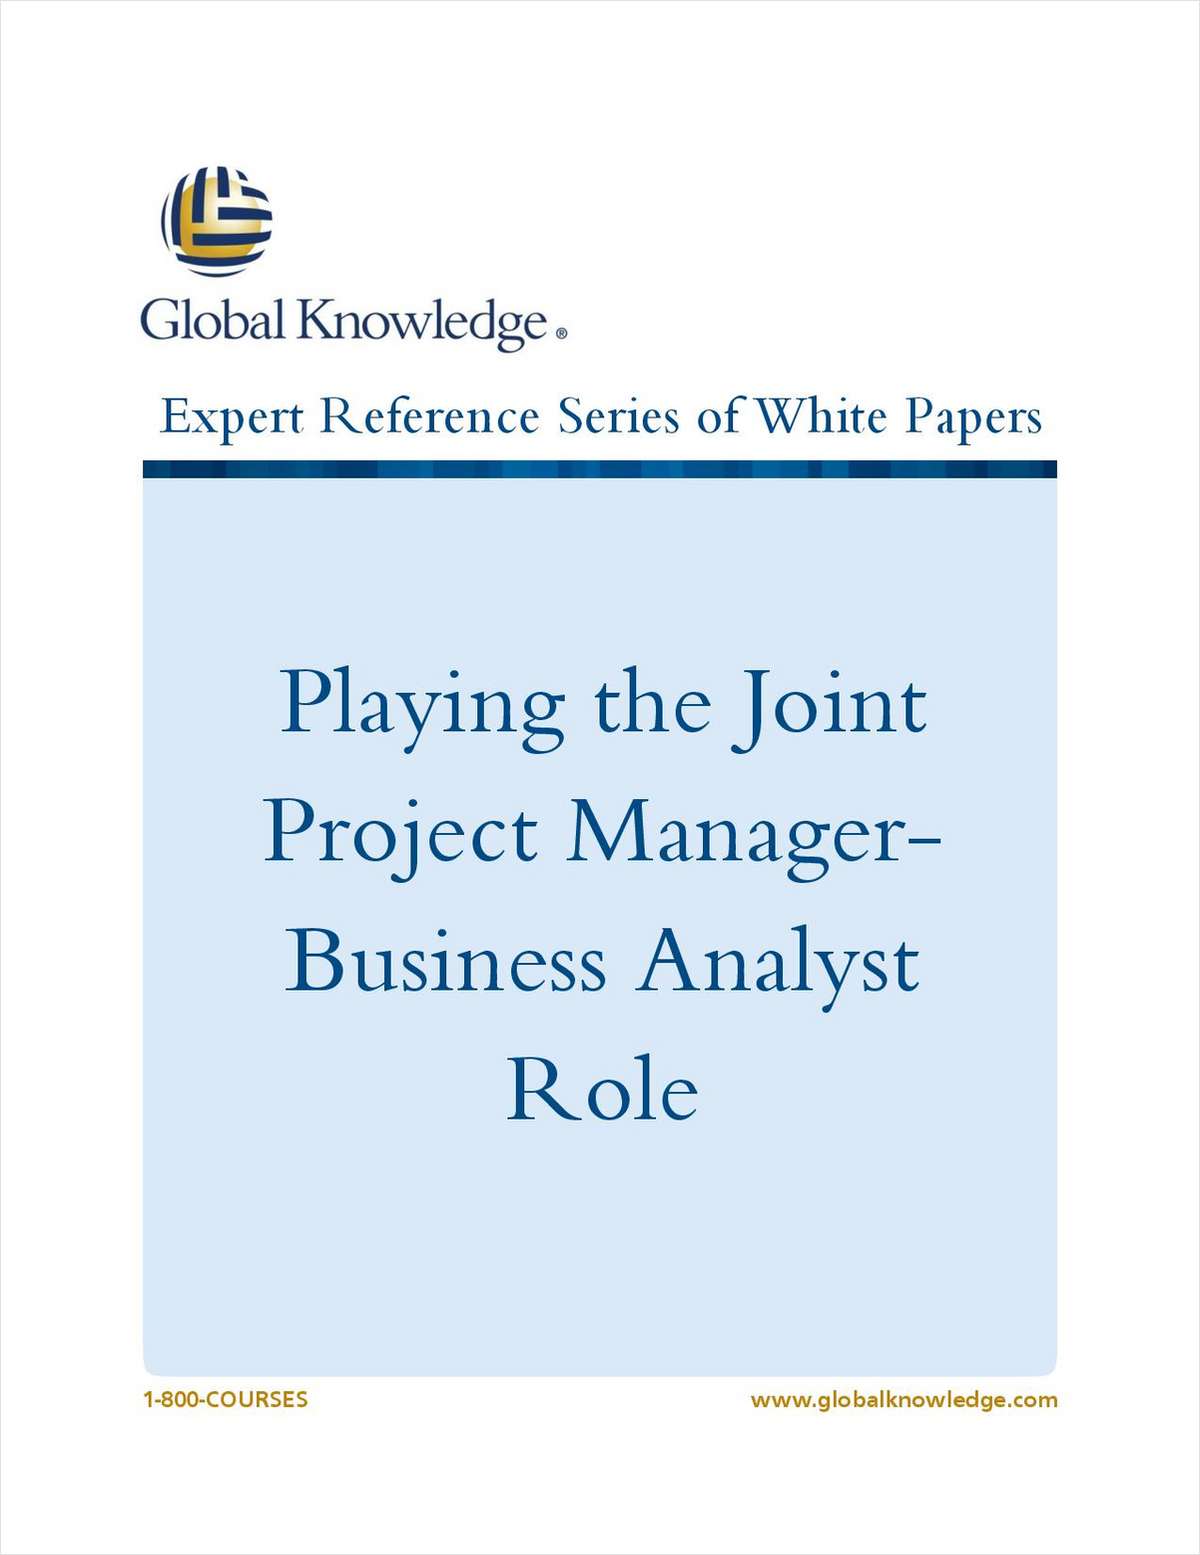 Playing the Joint Project Manager-Business Analyst Role